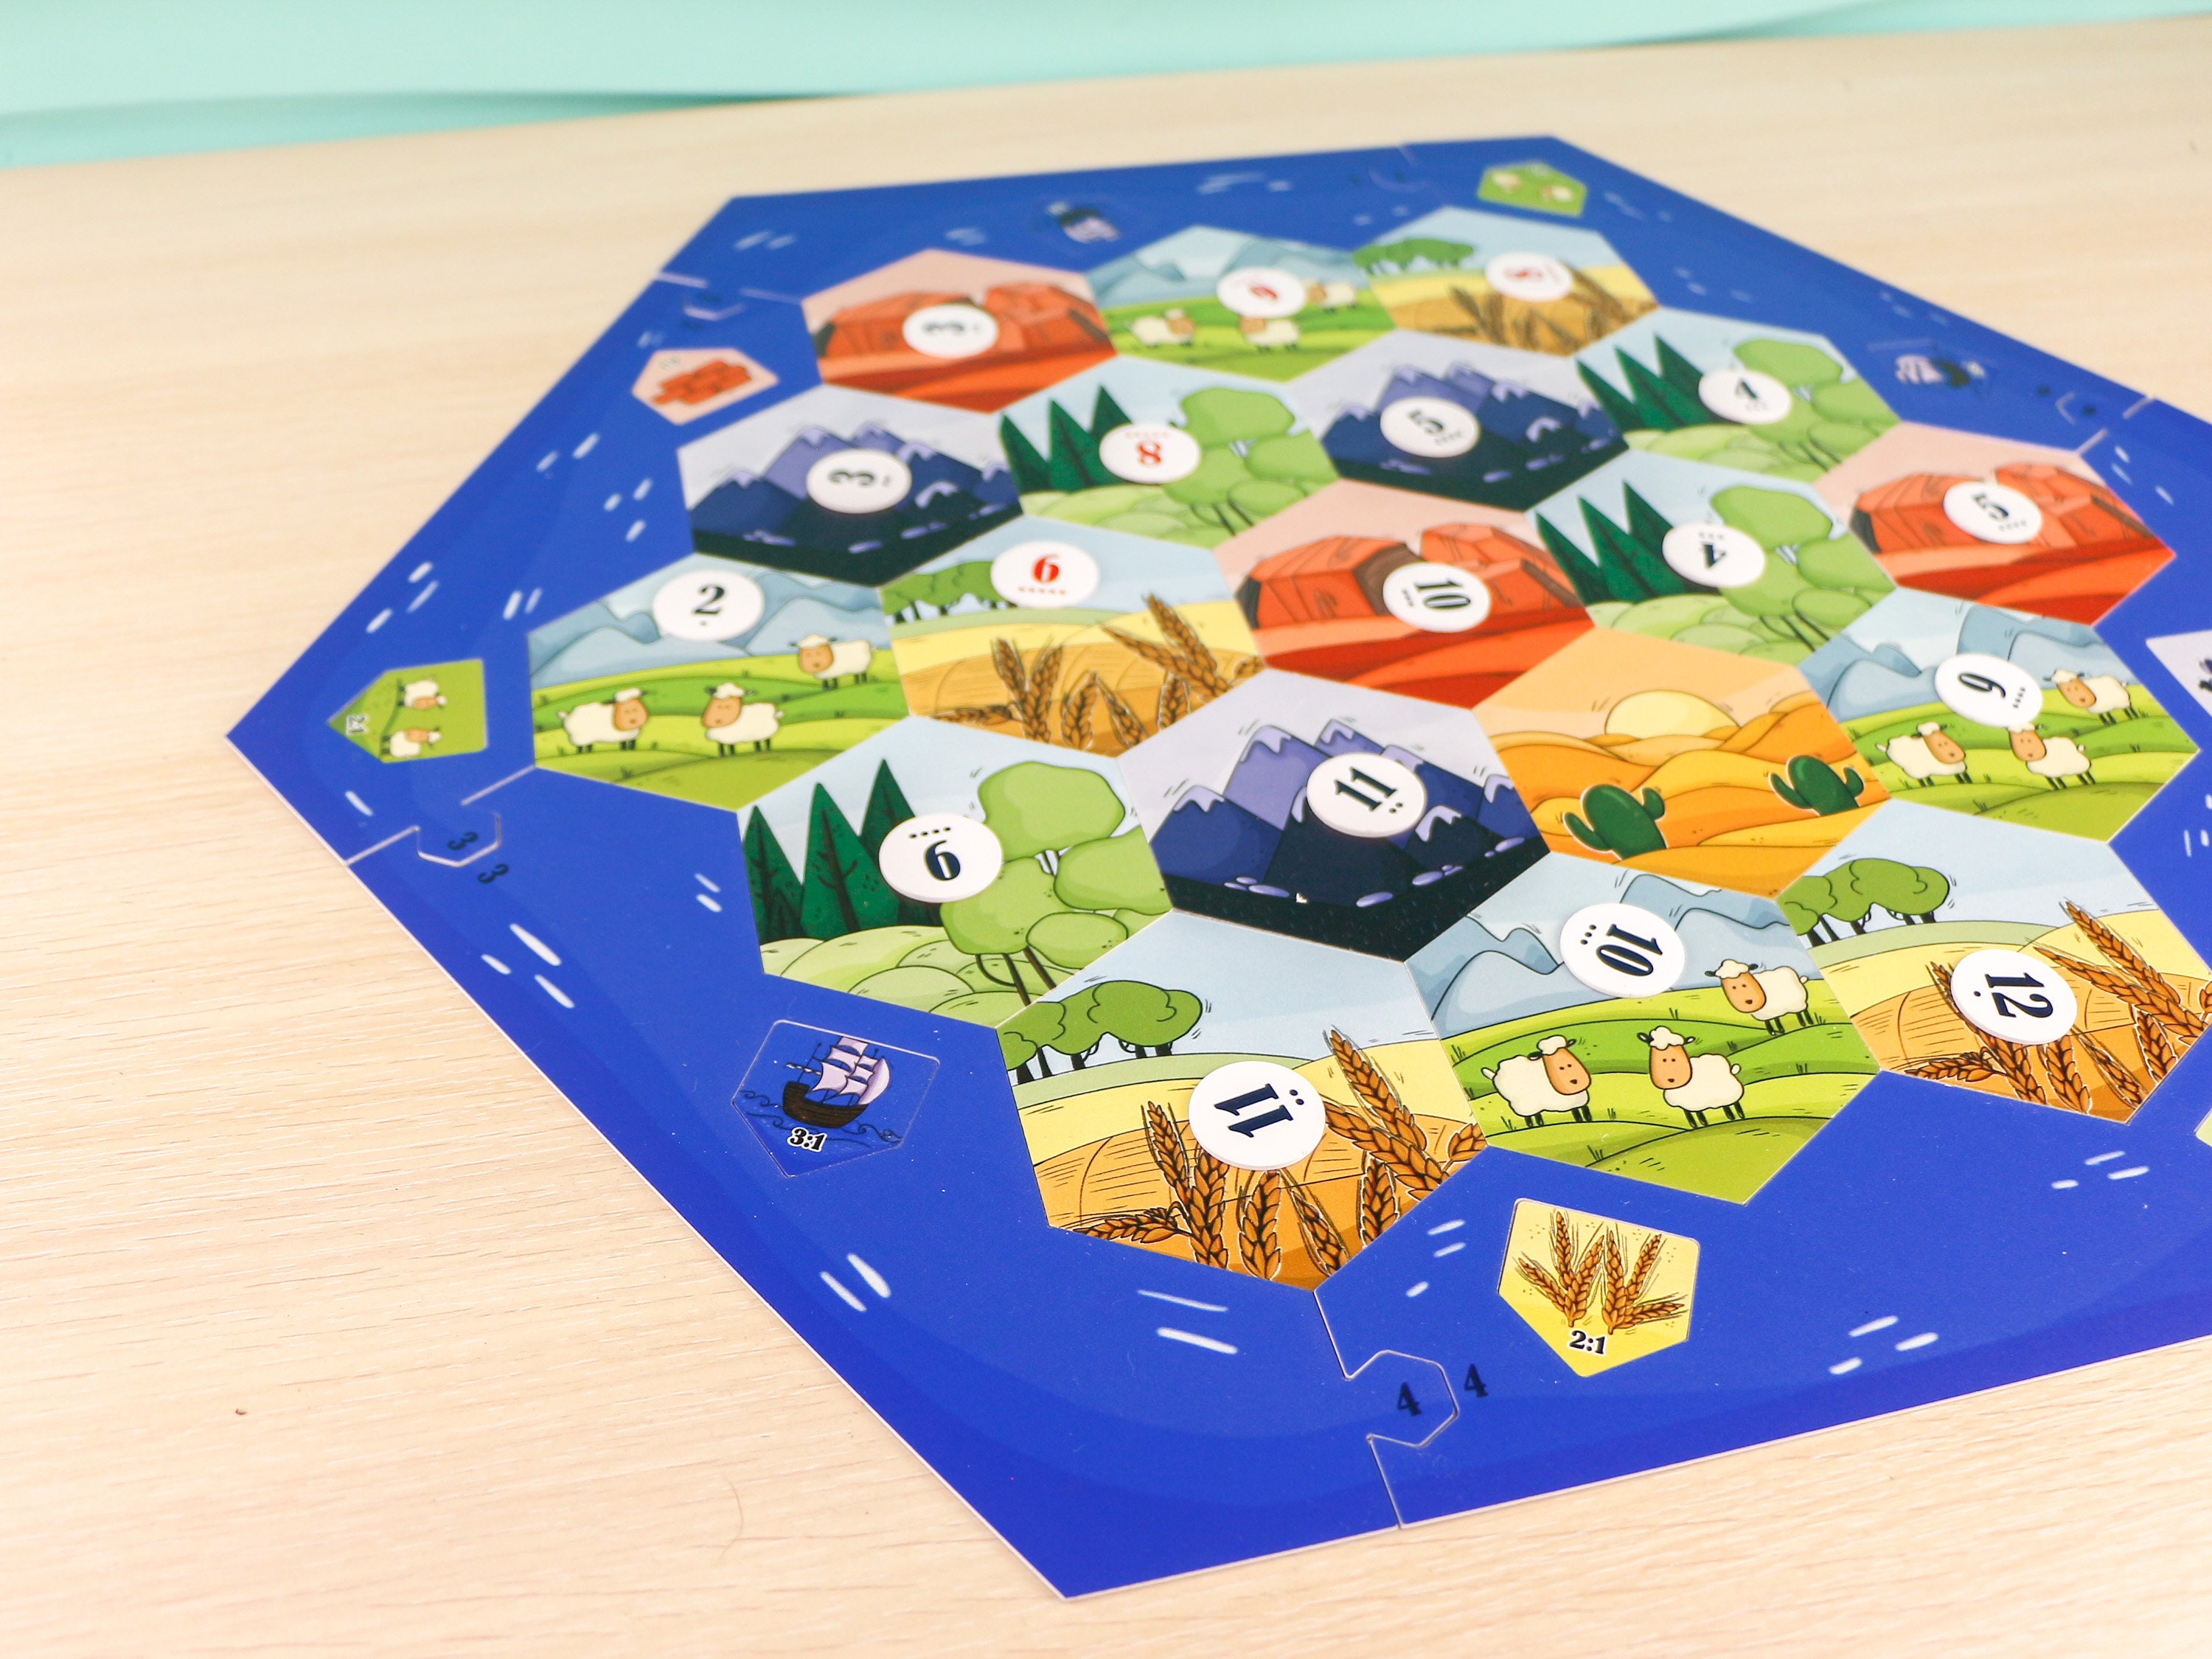 Plastic Game Board for Settlers of Catan 34 / 56 players